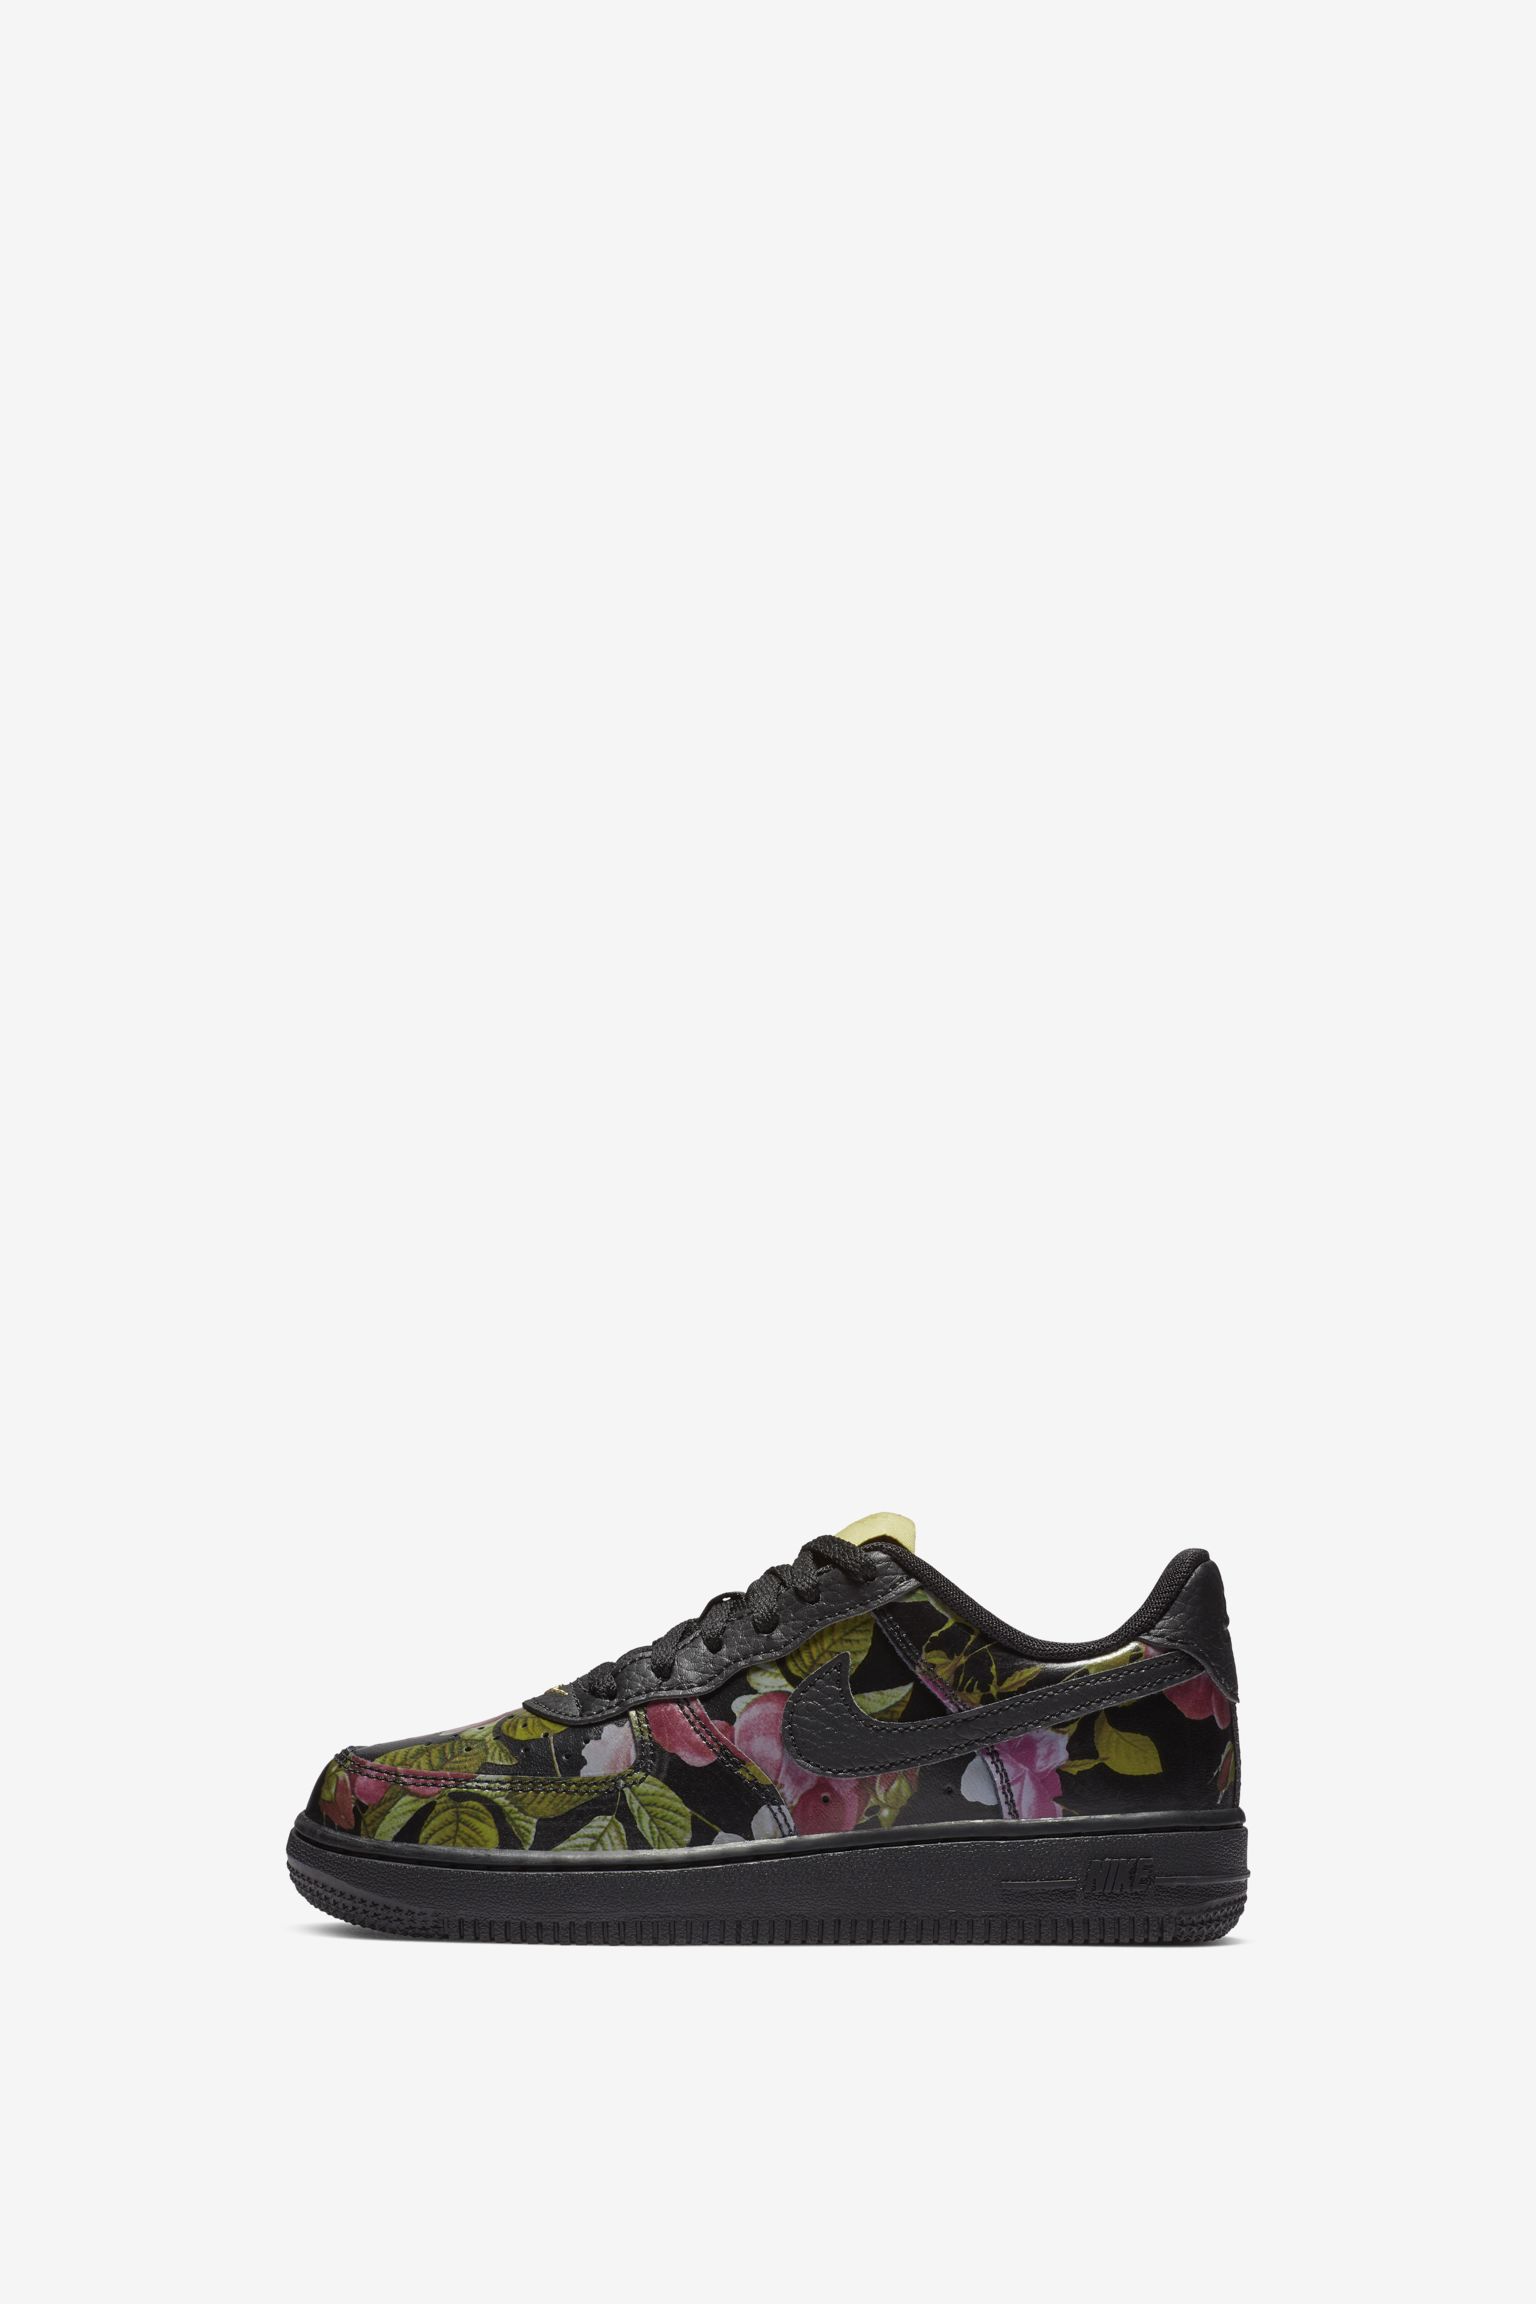 nike air force floral shoes